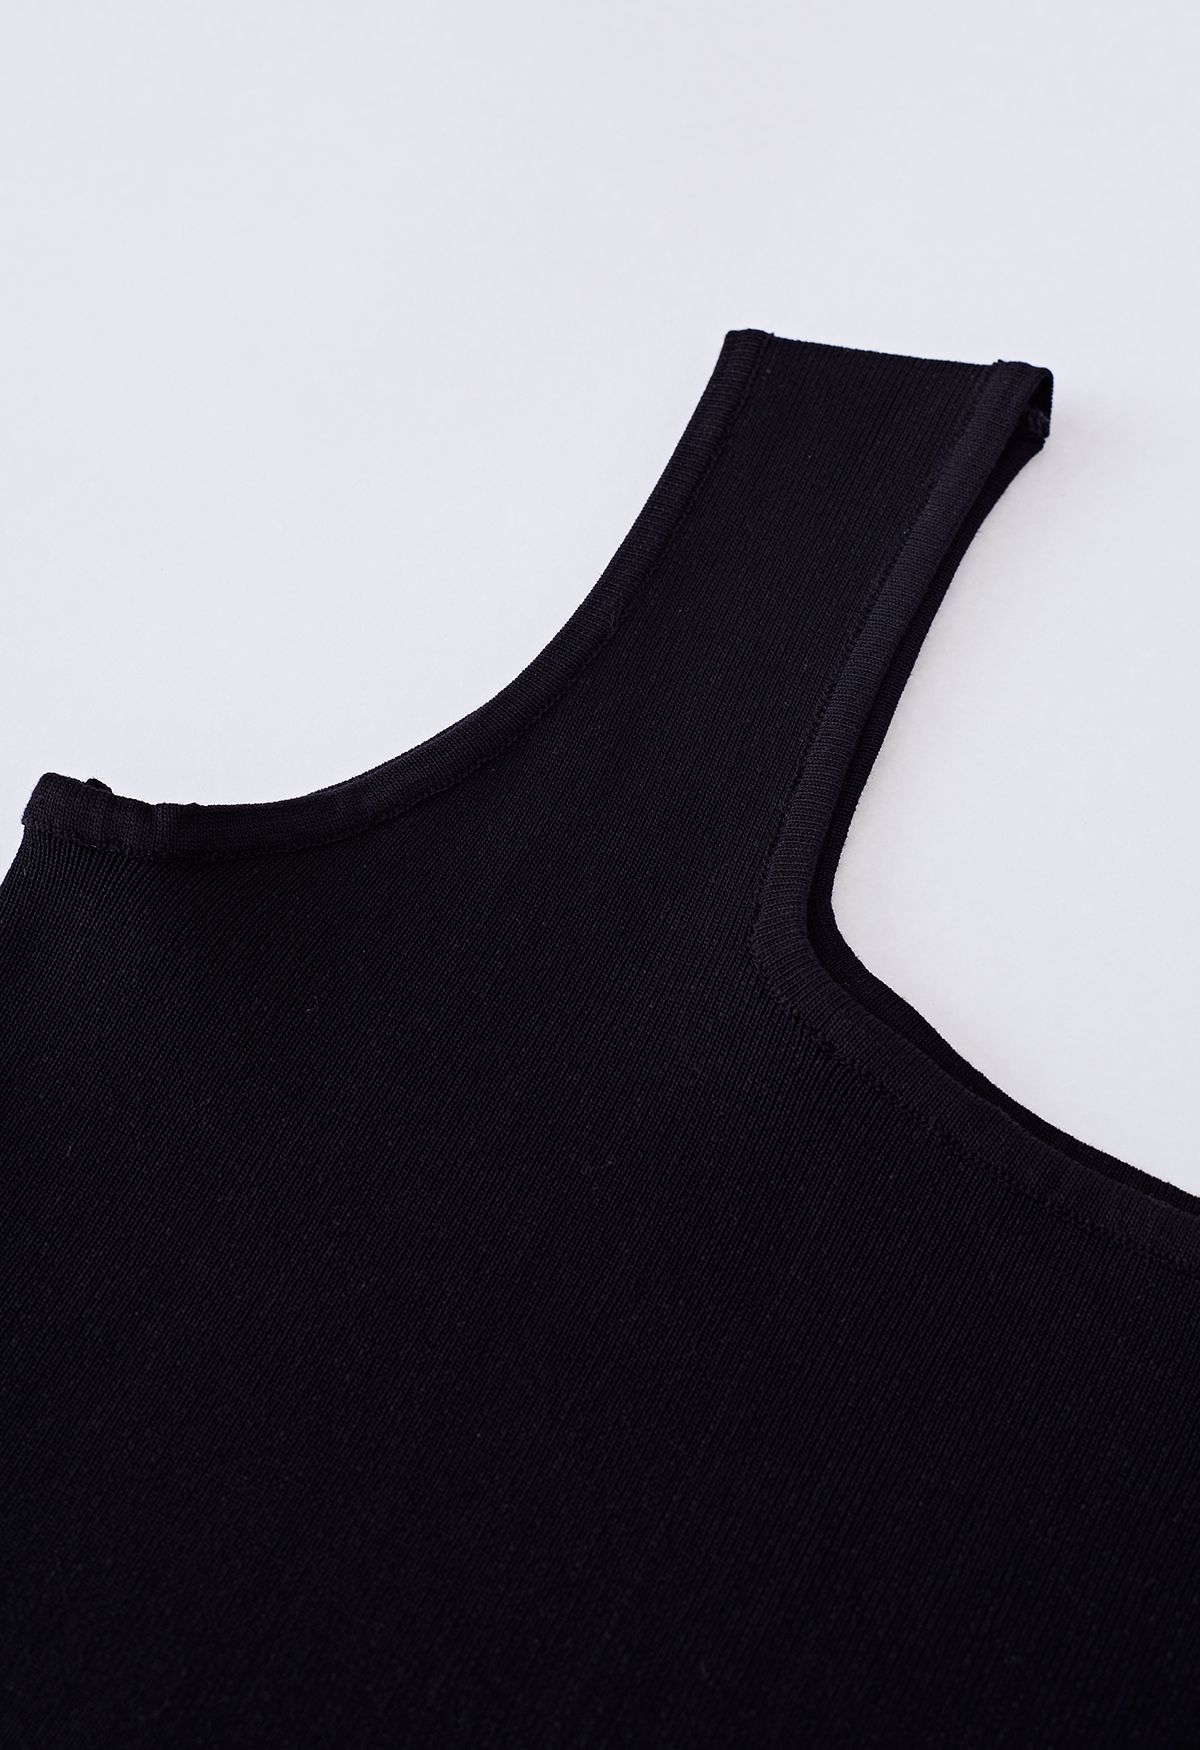 Chic Square Neck Knit Tank Top in Black